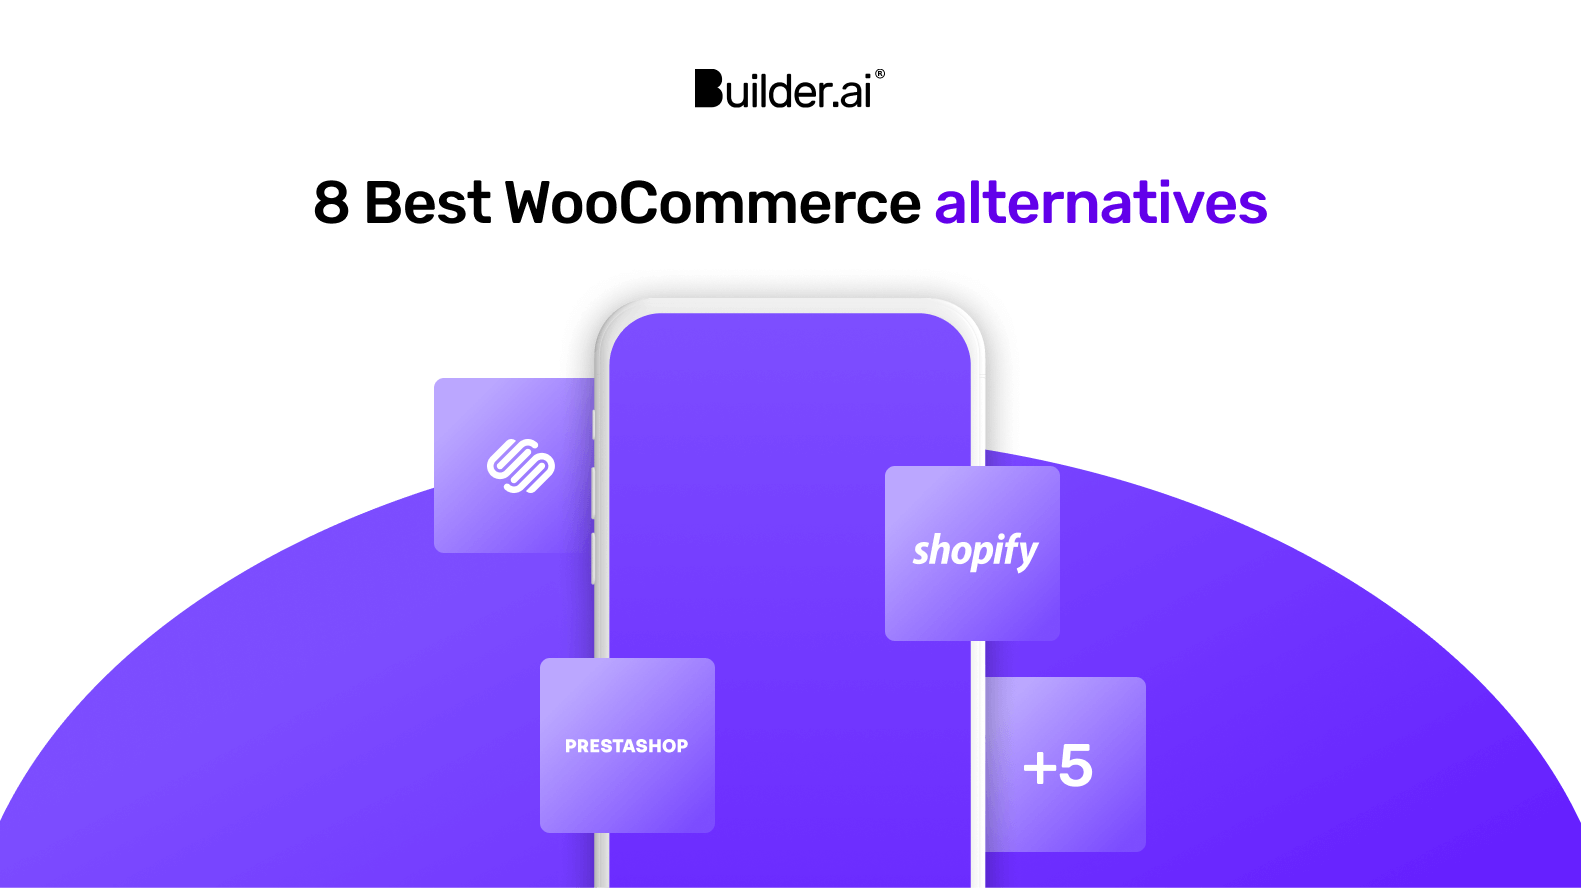 The 8 best WooCommerce alternatives that help you sell online